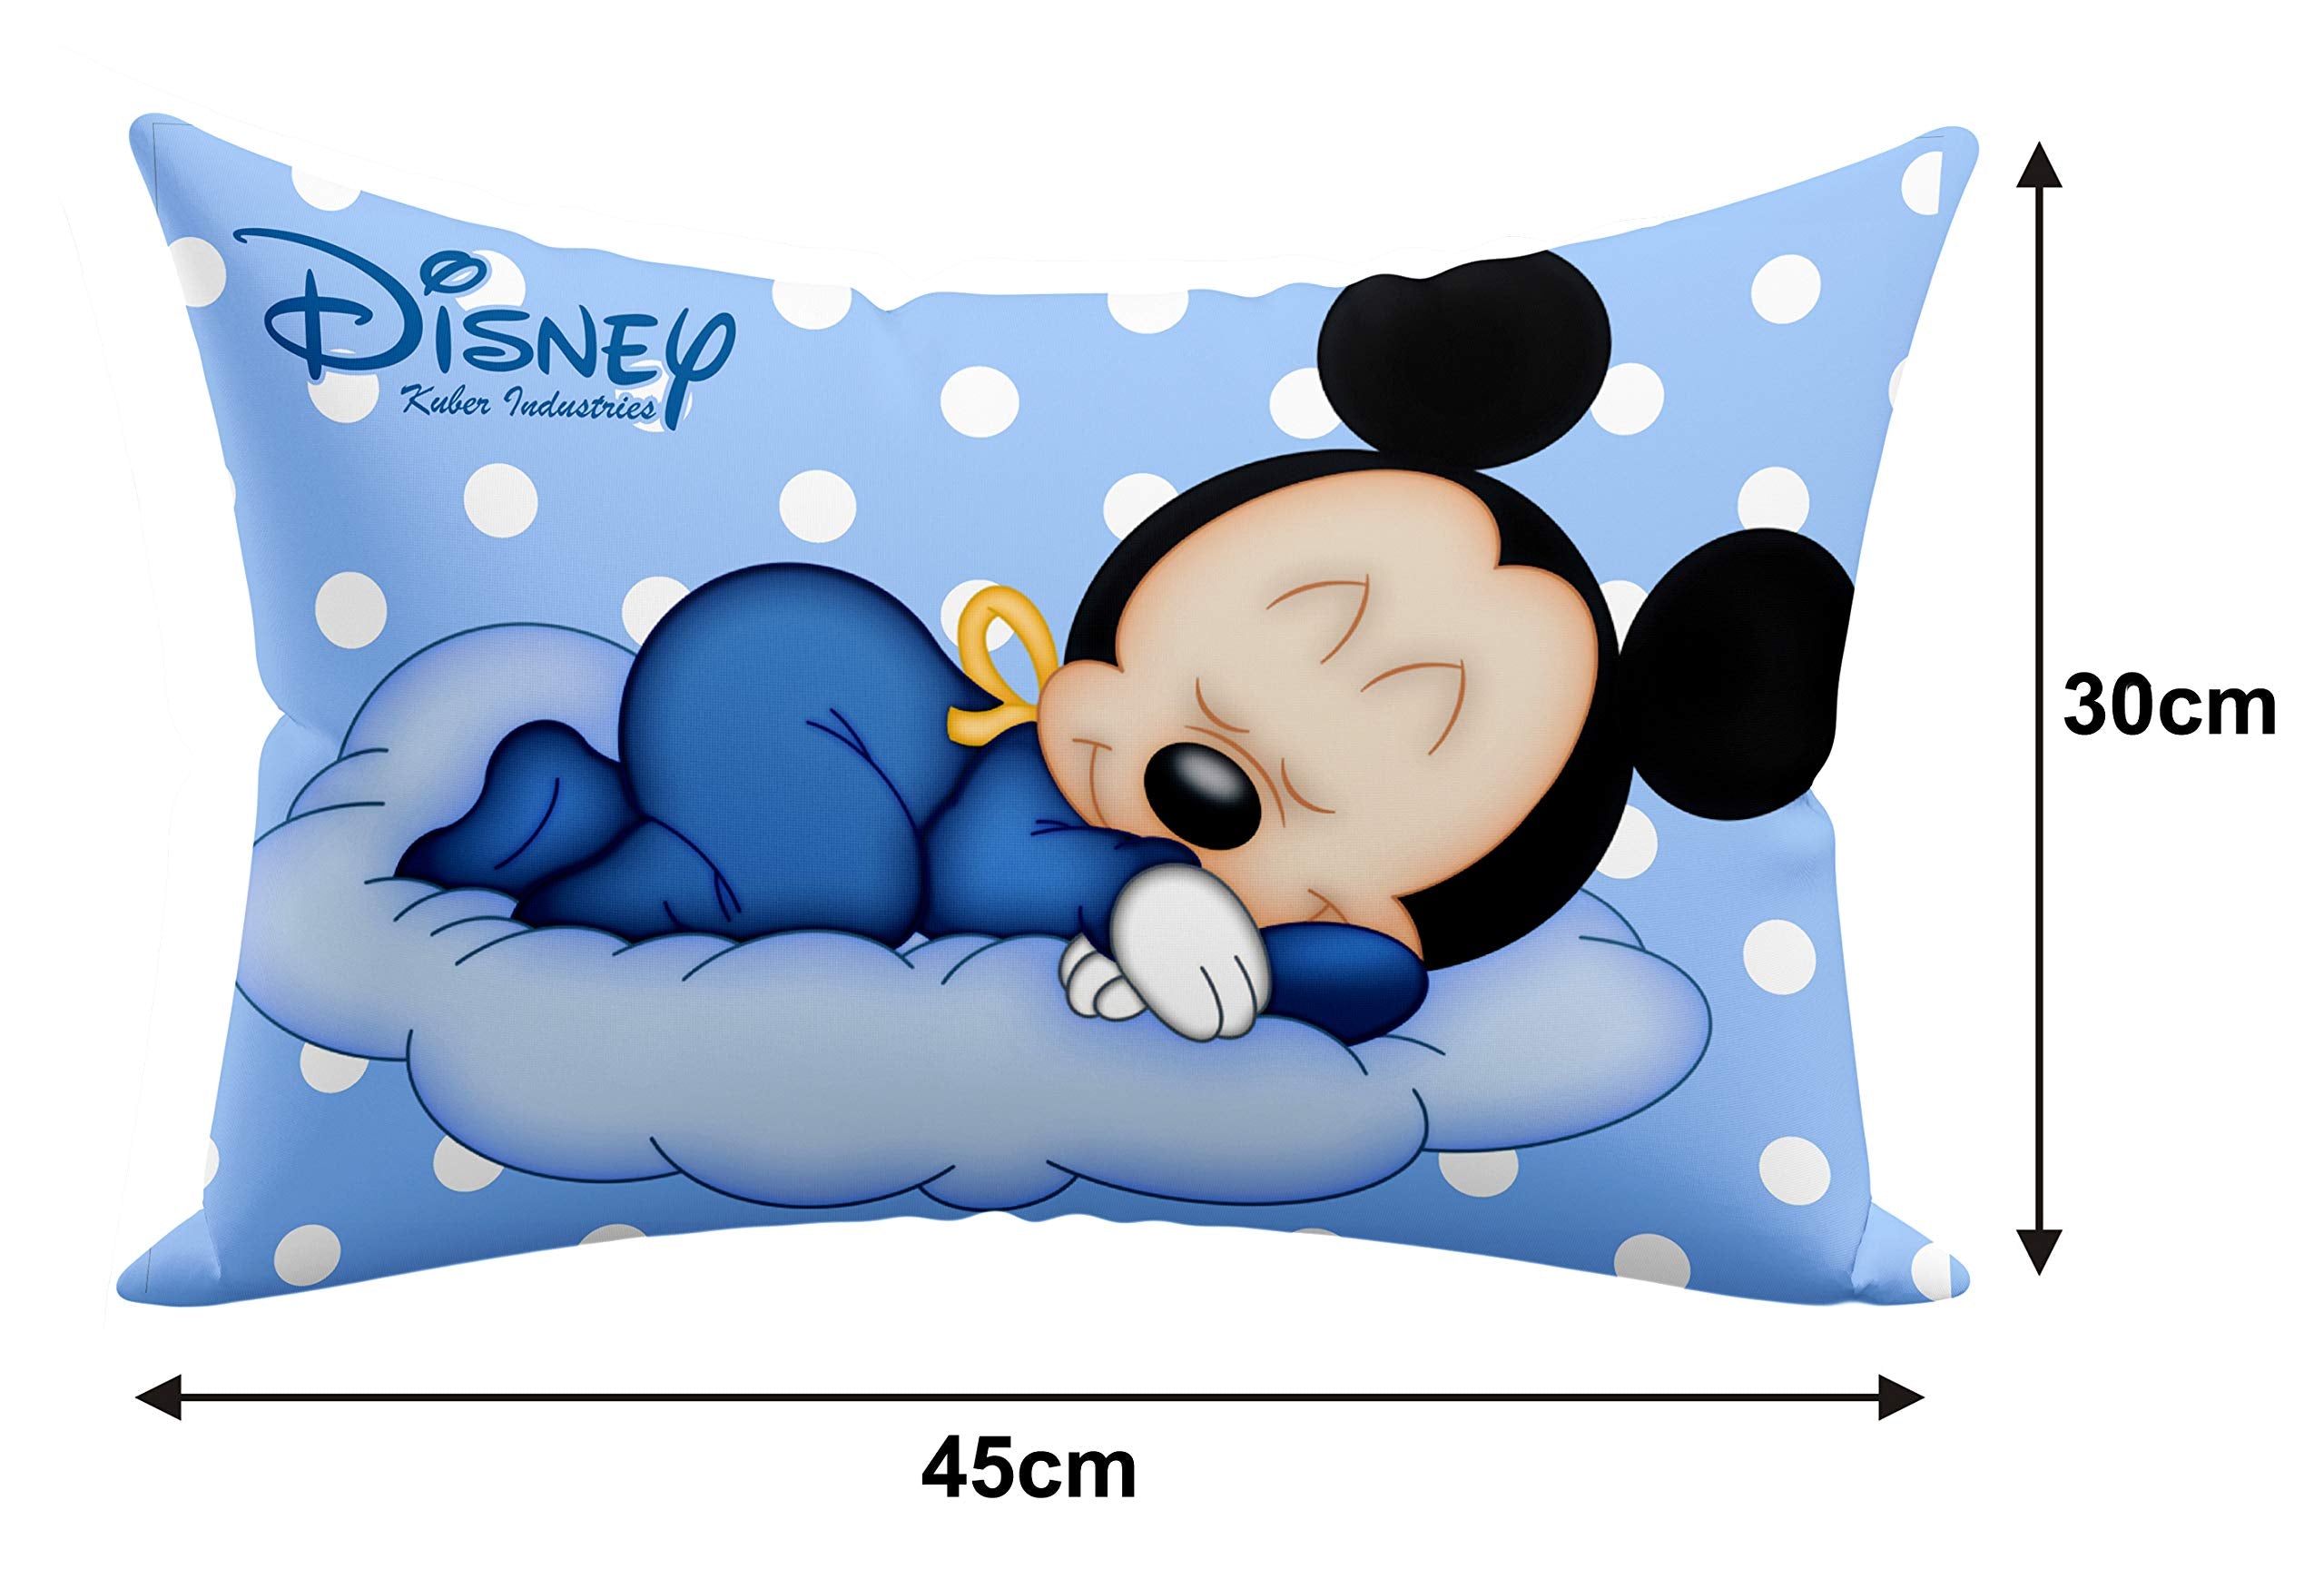 Heart Home Disney Print Organic Toddler Bedding Small Baby Pillow|100% Natural Cotton Cover & Soft Microfiber Material|Size 12x18 (Sky Blue)